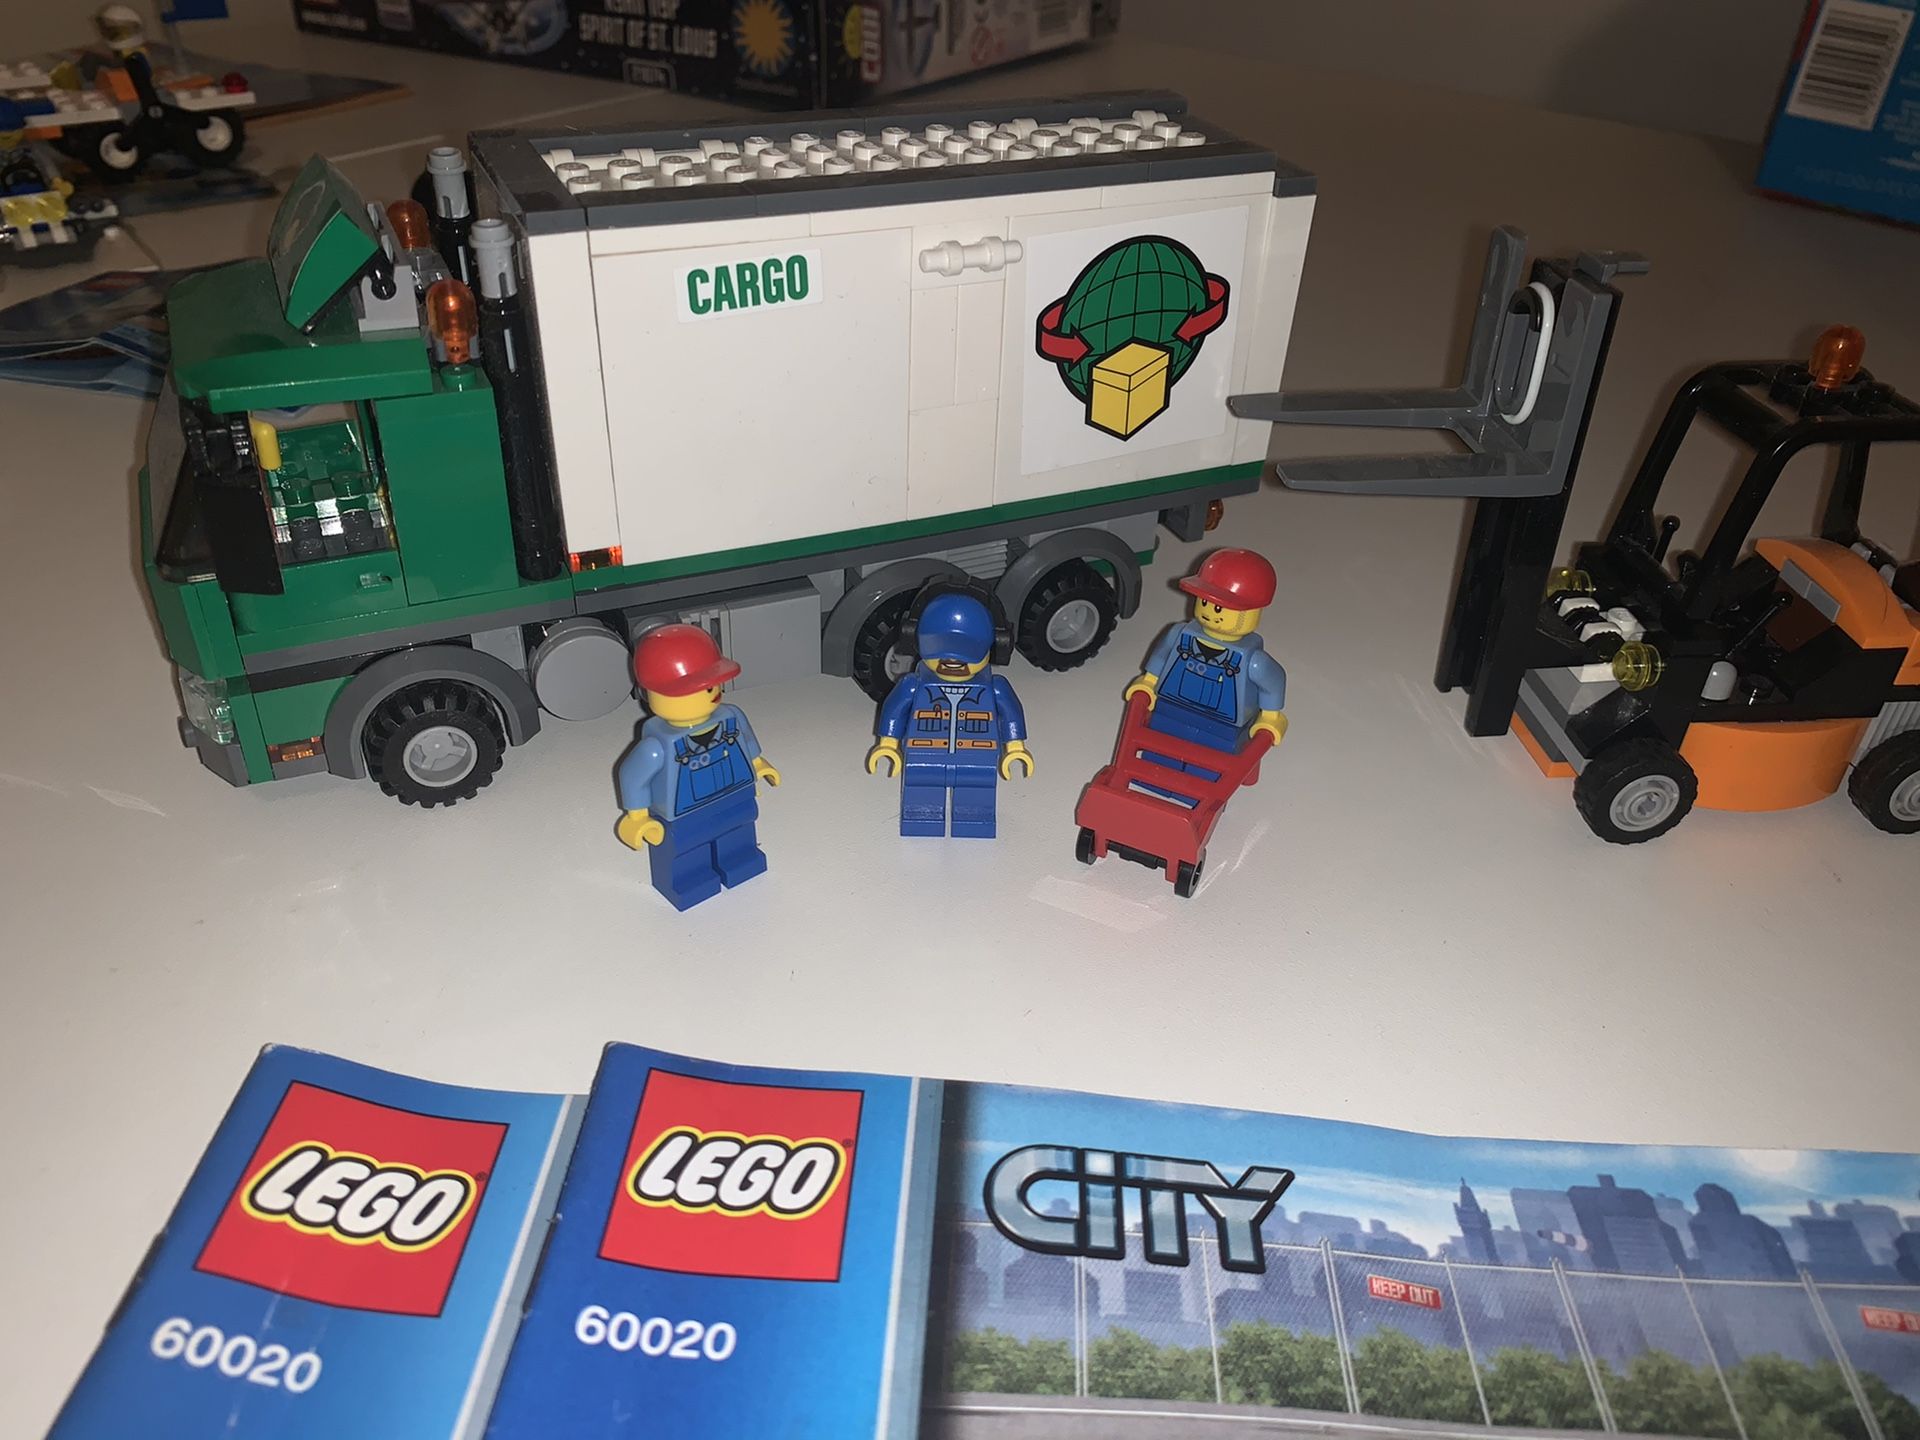 LEGO 60020 City Cargo Truck. Complete with figures and instructions.